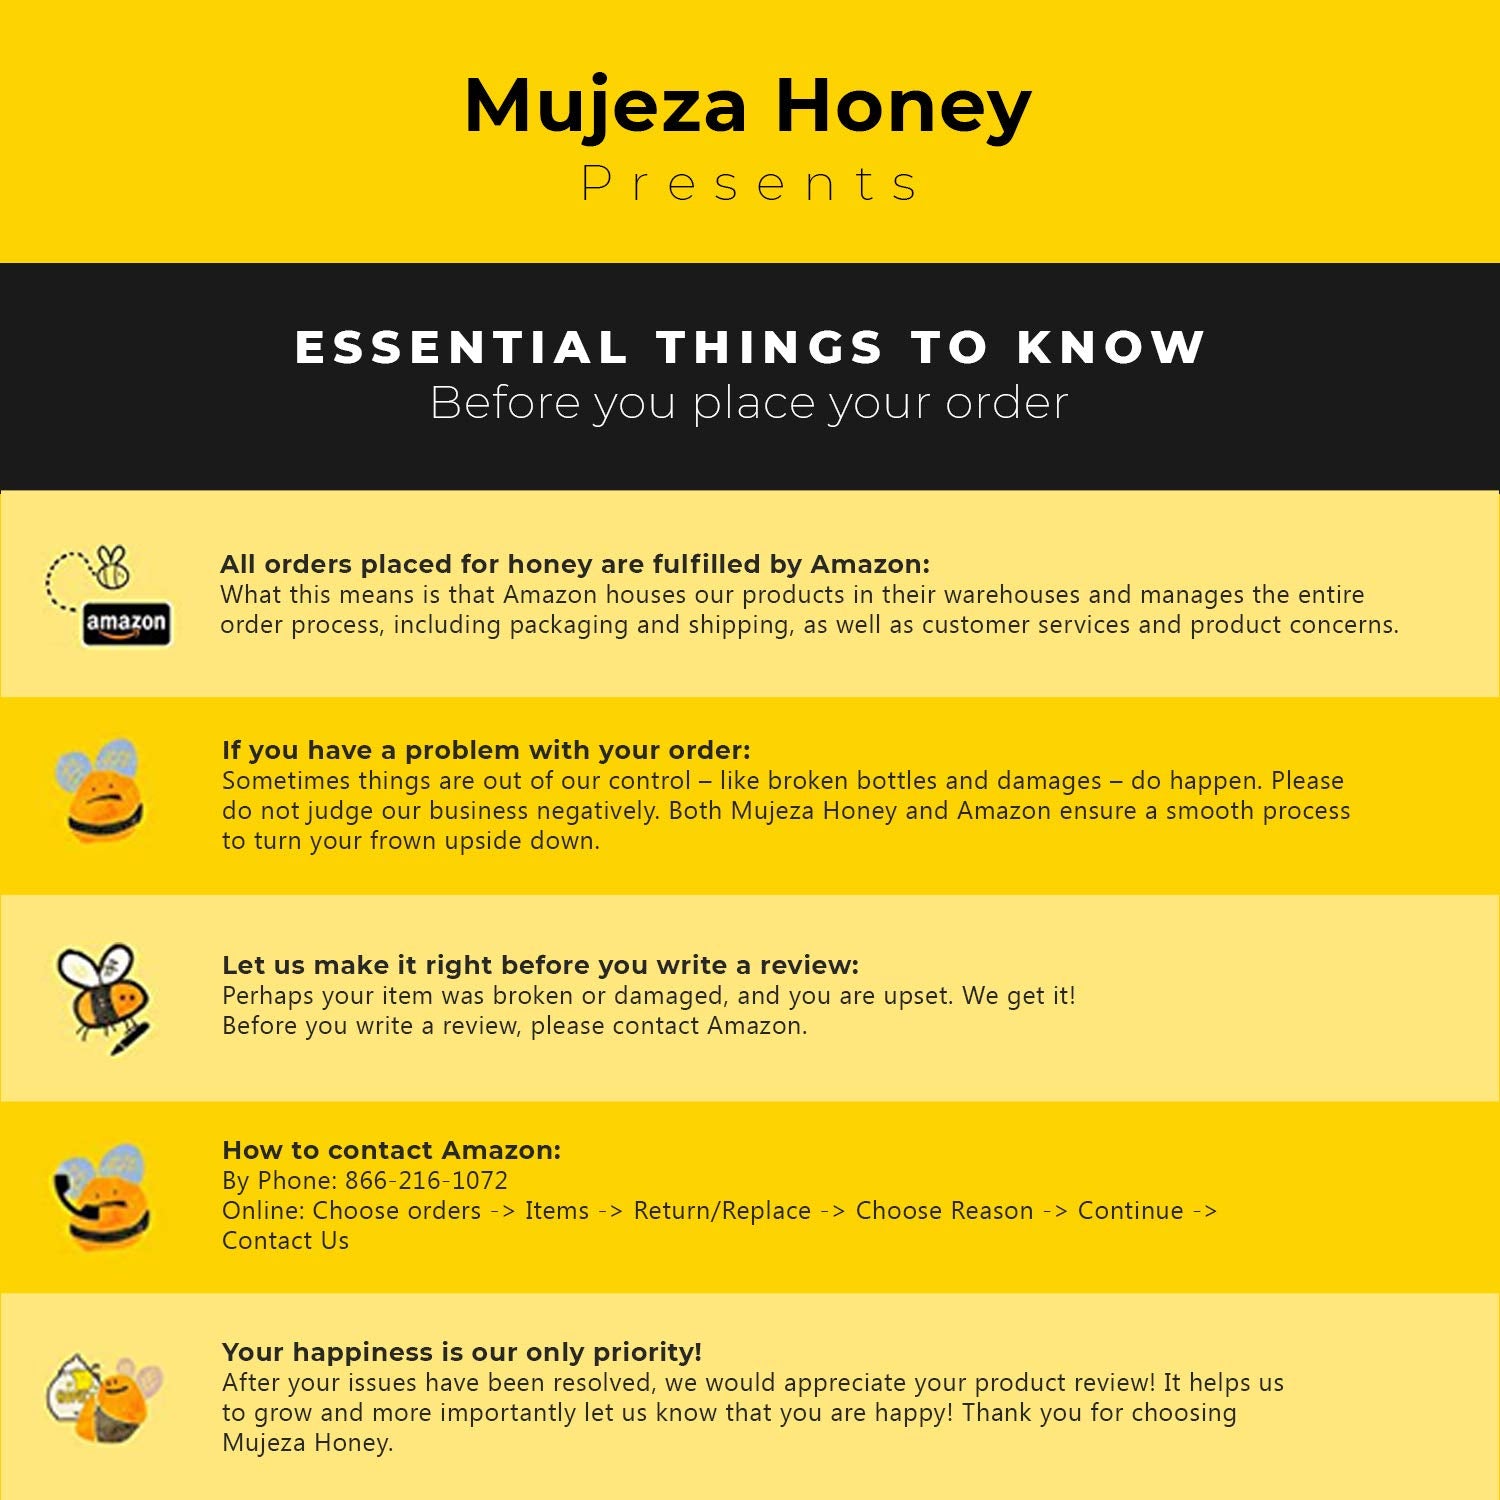 Mujeza Honey - Essential Things to read and know about our stores before placing orders